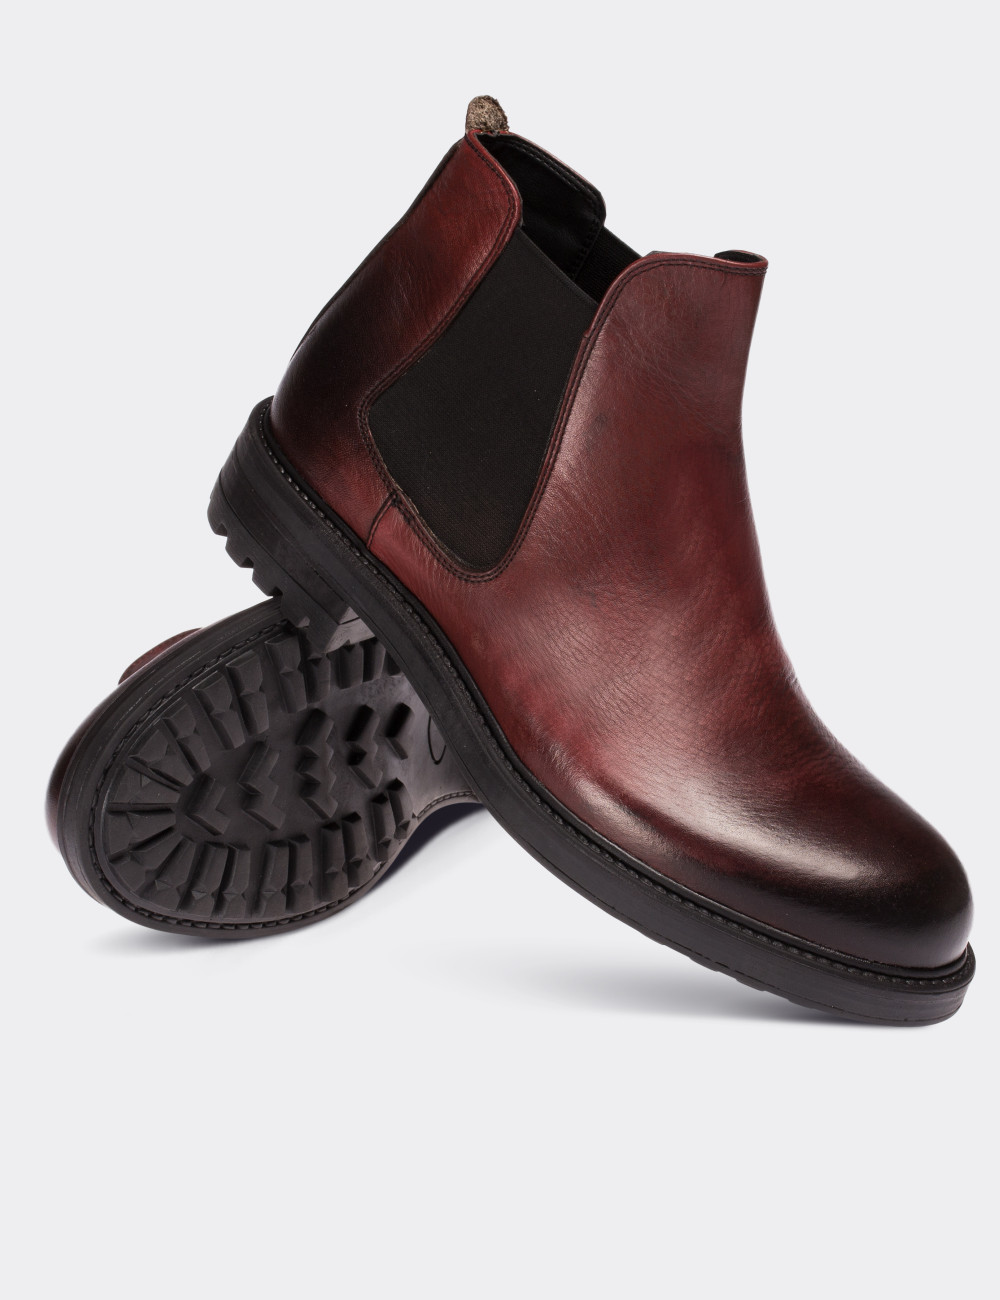 Burgundy  Leather Chelsea Boots - 01620MBRDC02